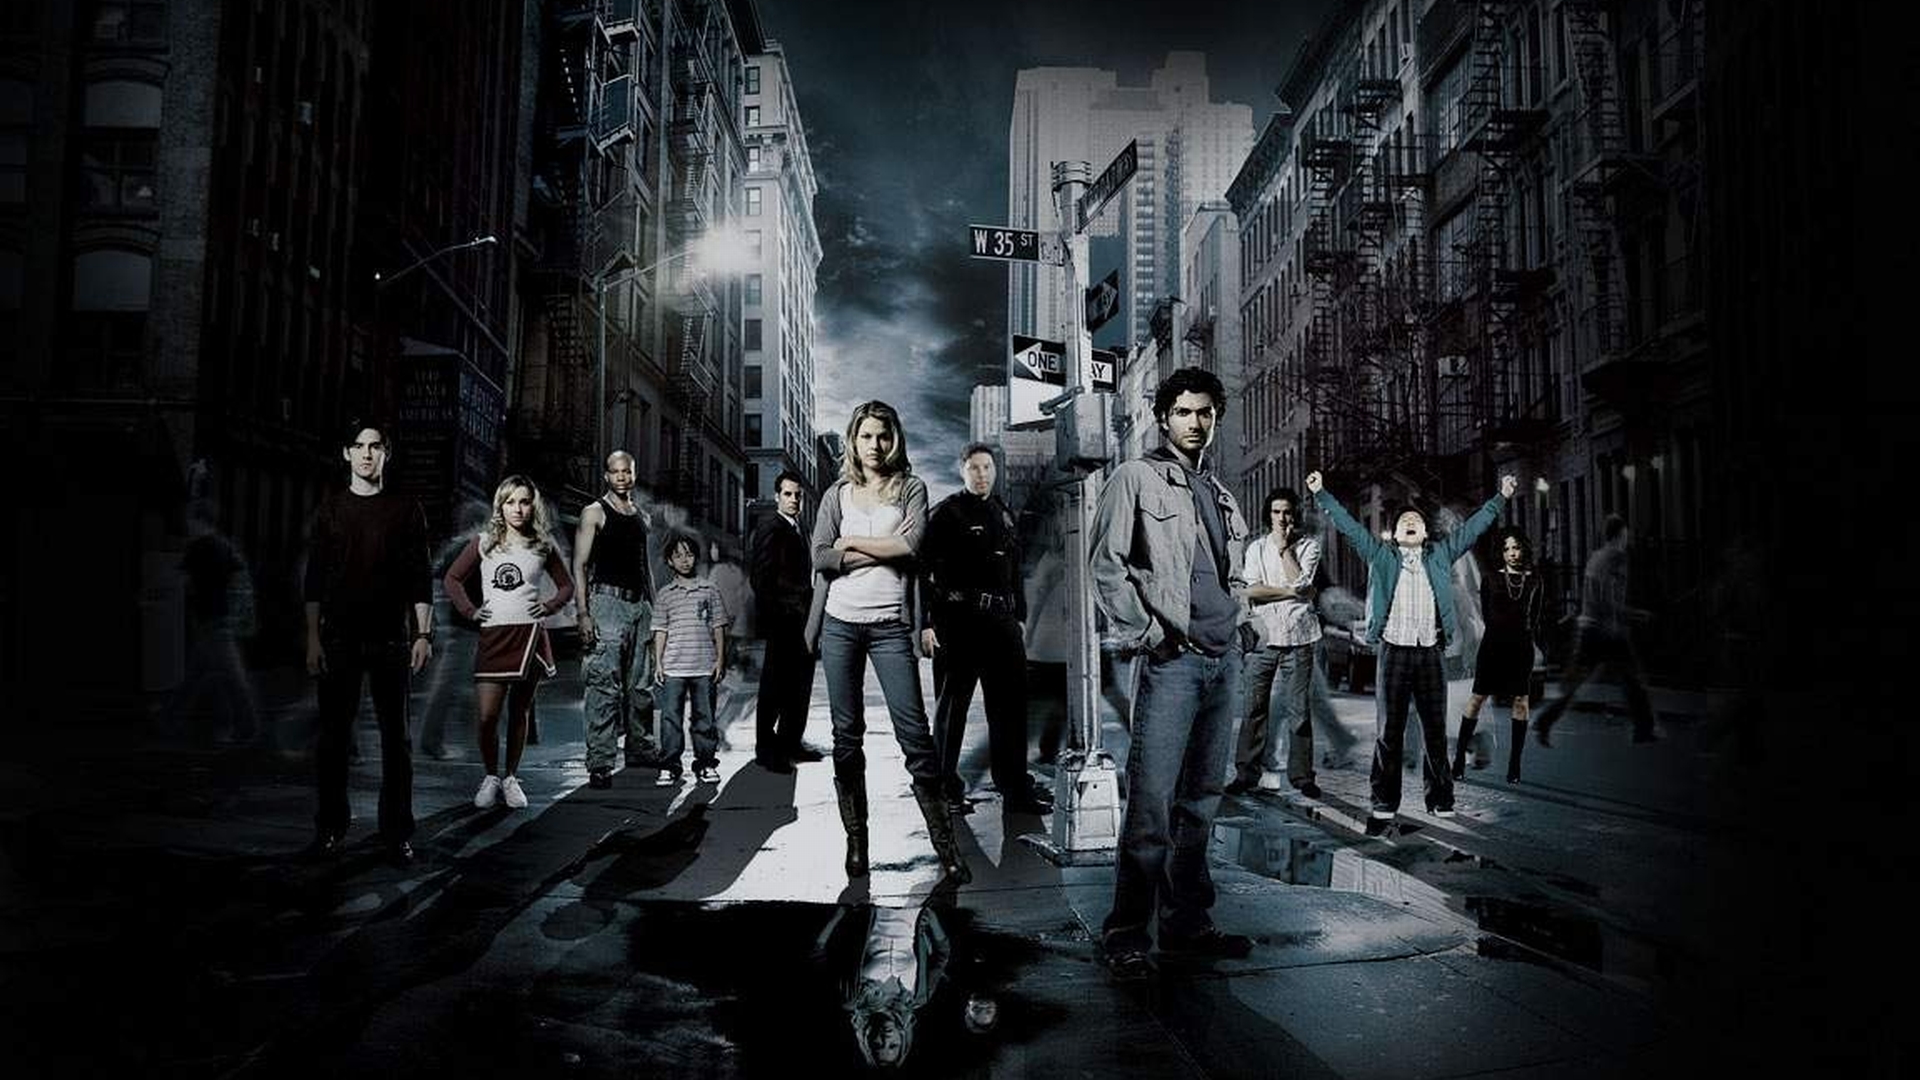 TV Show Heroes HD Wallpaper | Background Image